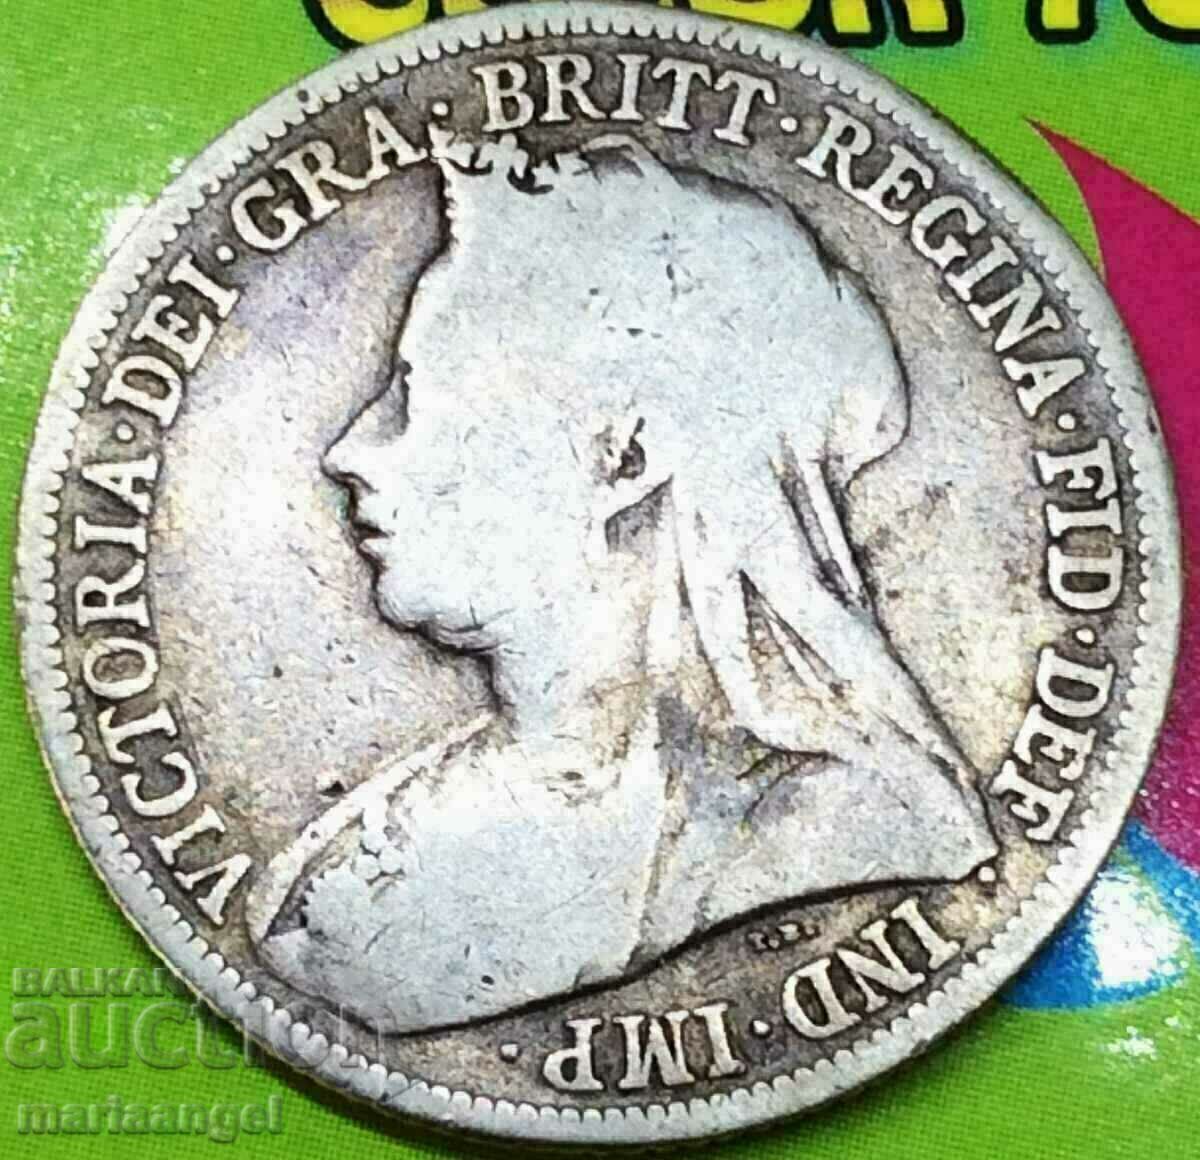 Great Britain 1 shilling 1897 23.5mm 5.49g silver